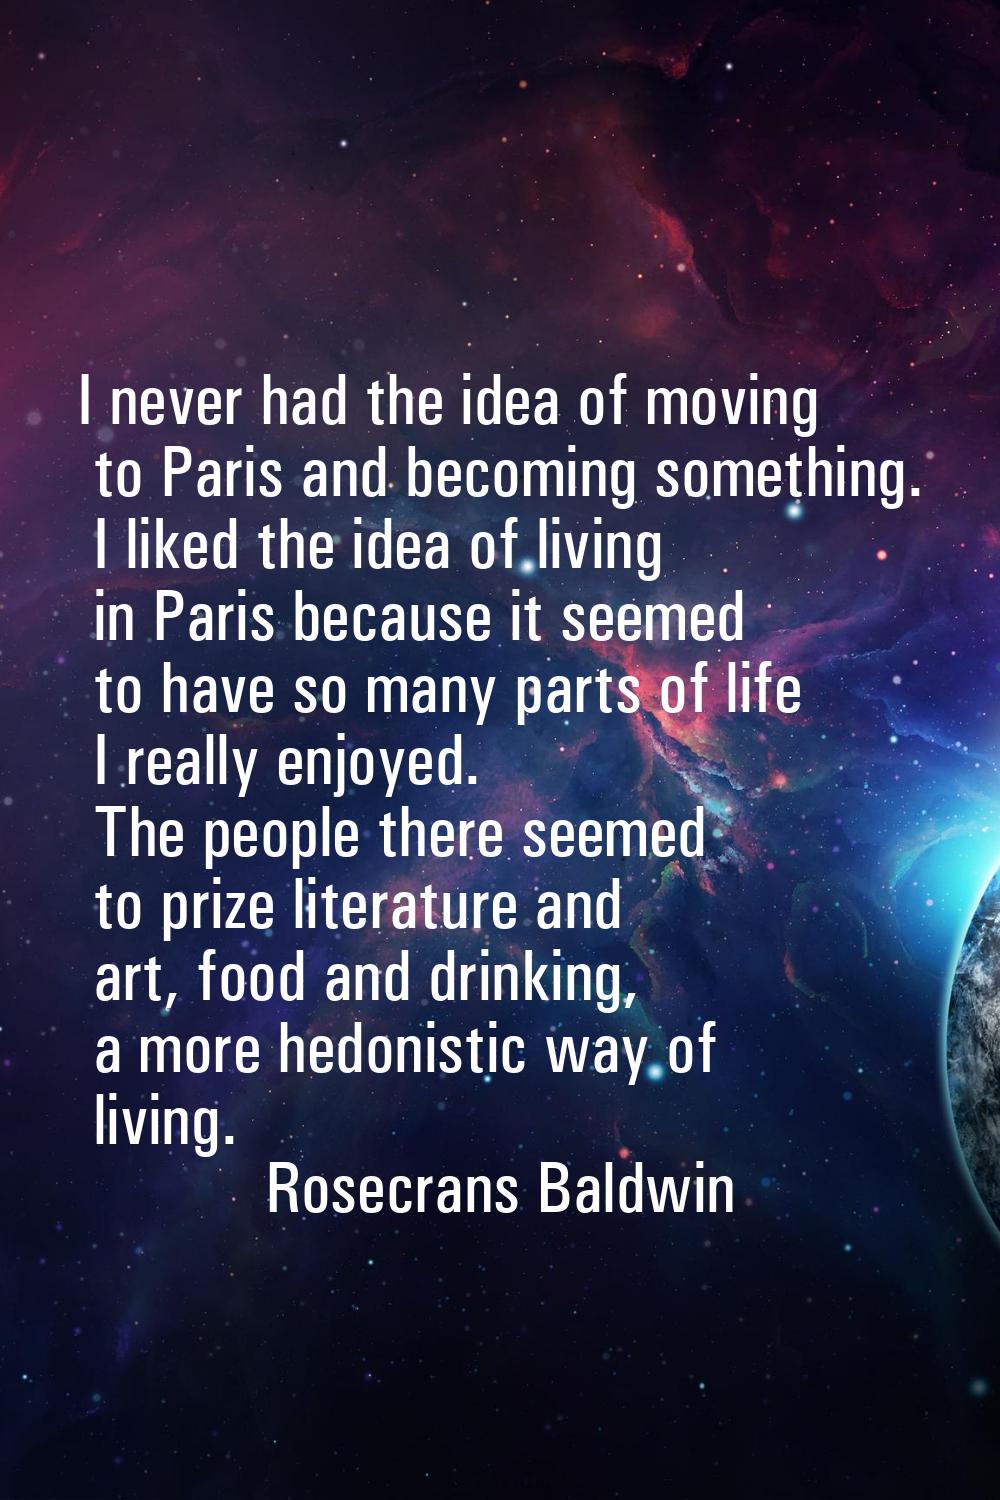 I never had the idea of moving to Paris and becoming something. I liked the idea of living in Paris